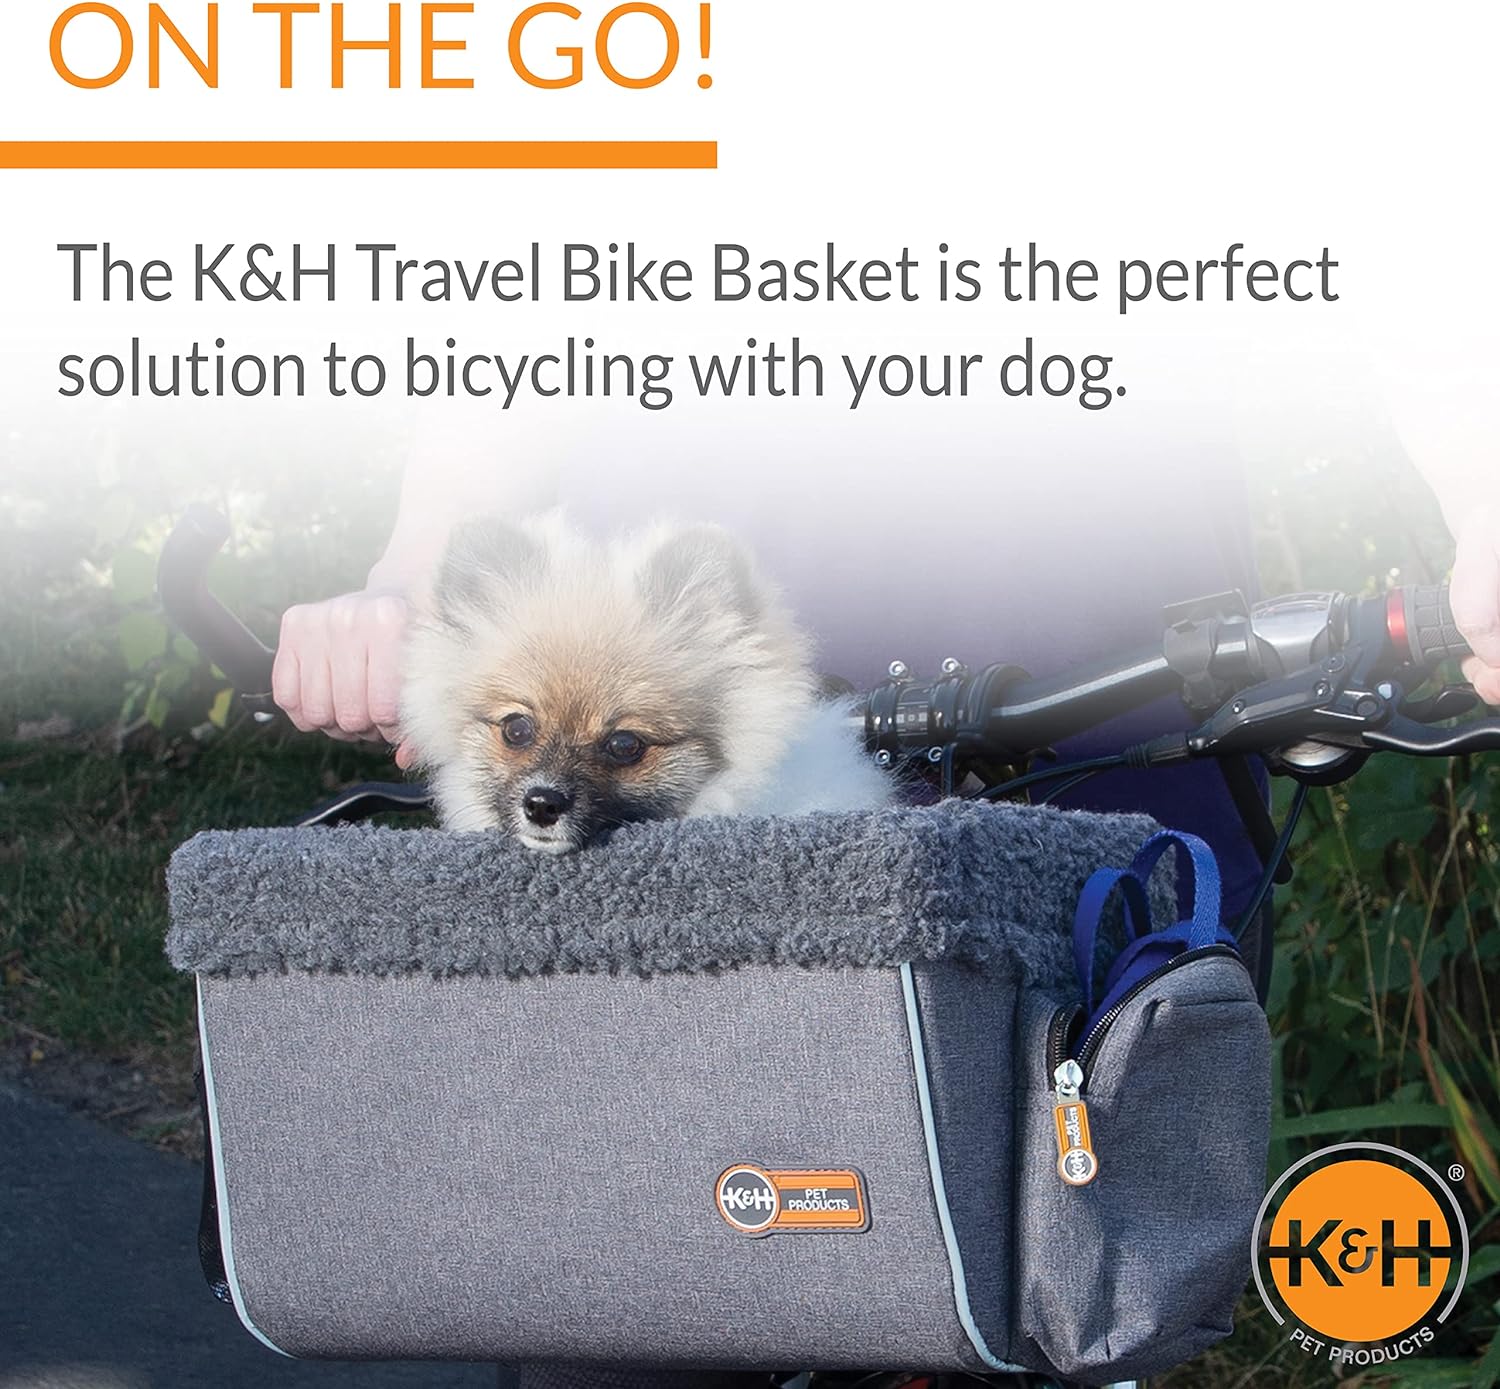 K&H Pet Products Universal Bike Pet Carrier for Travel, Cat and Dog Bicycle Baskets, Classy Gray Small 9 X 12.5 X 8 Inches